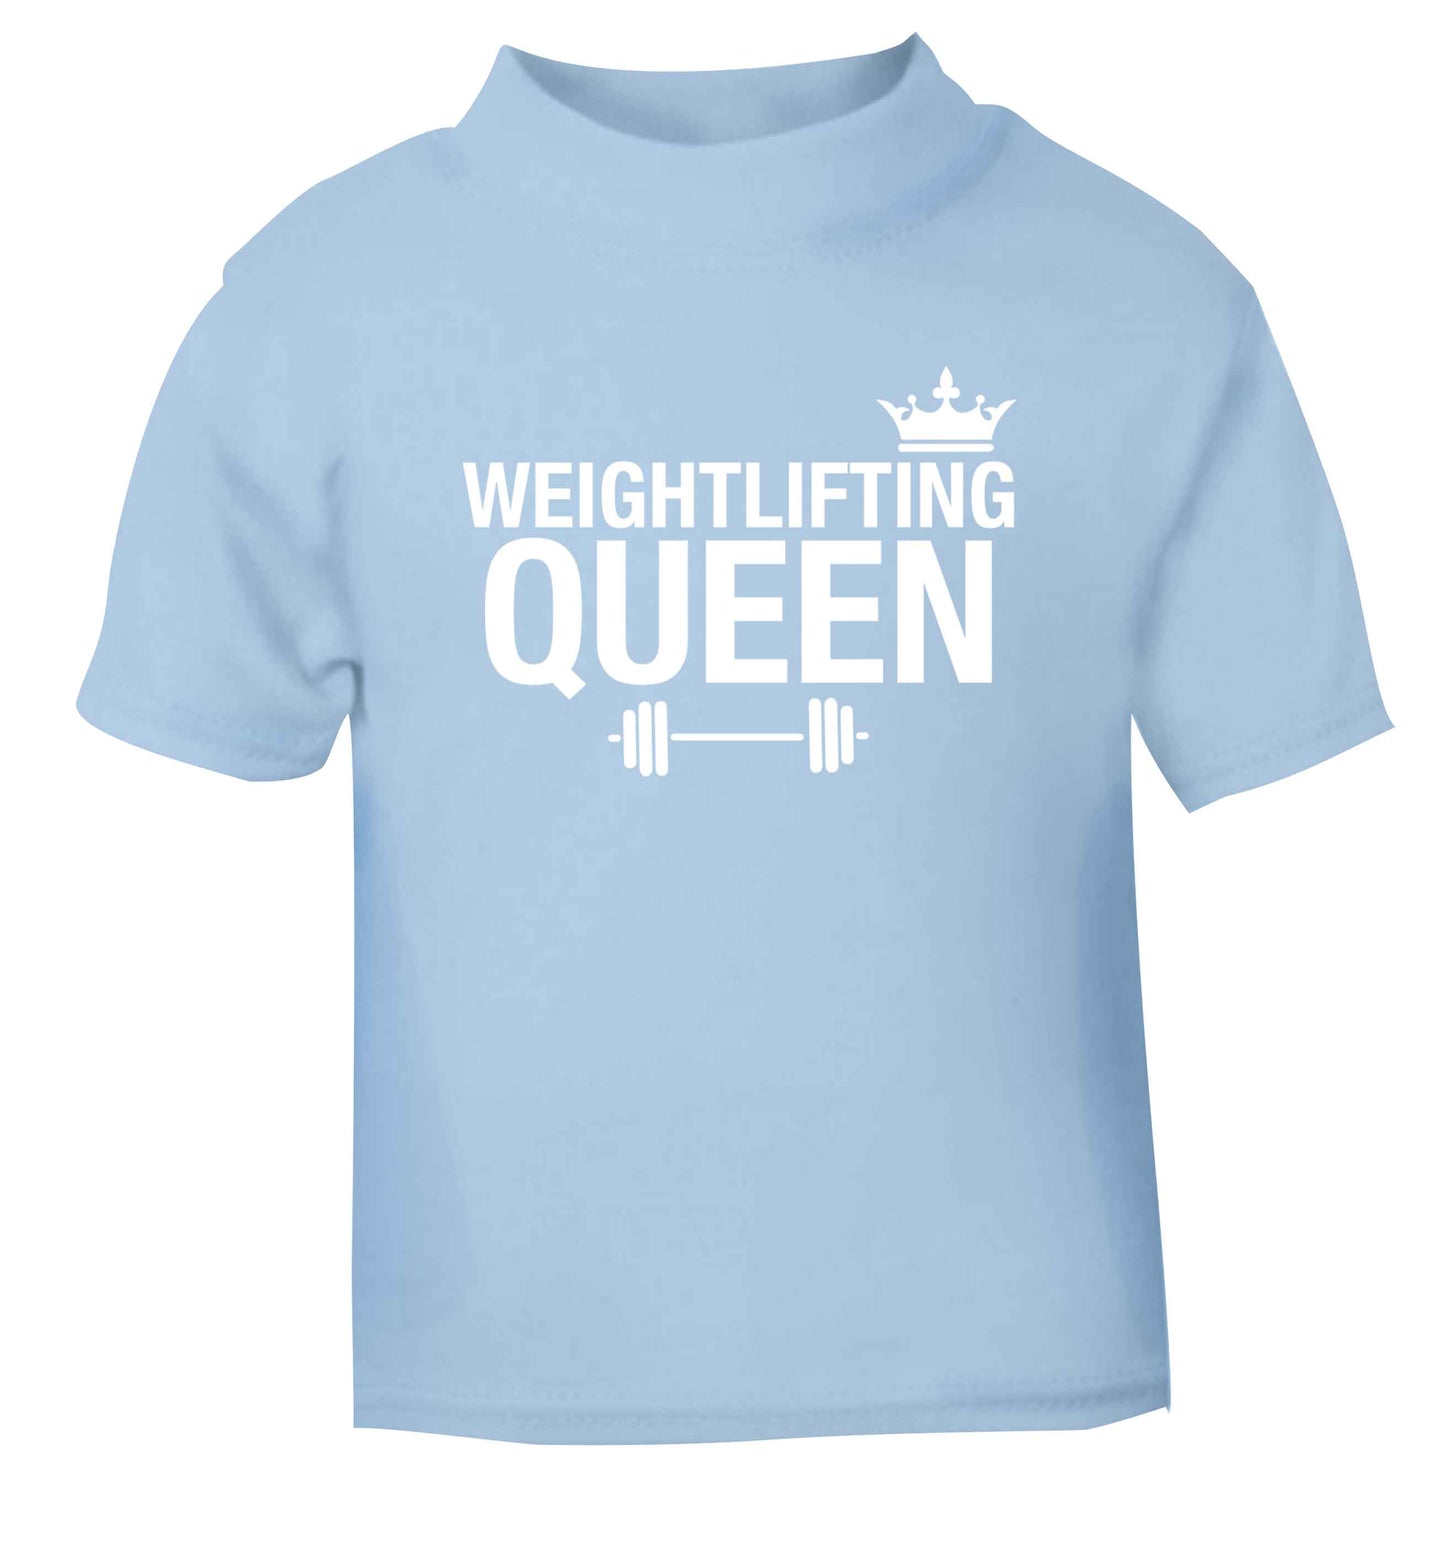 Weightlifting Queen light blue Baby Toddler Tshirt 2 Years